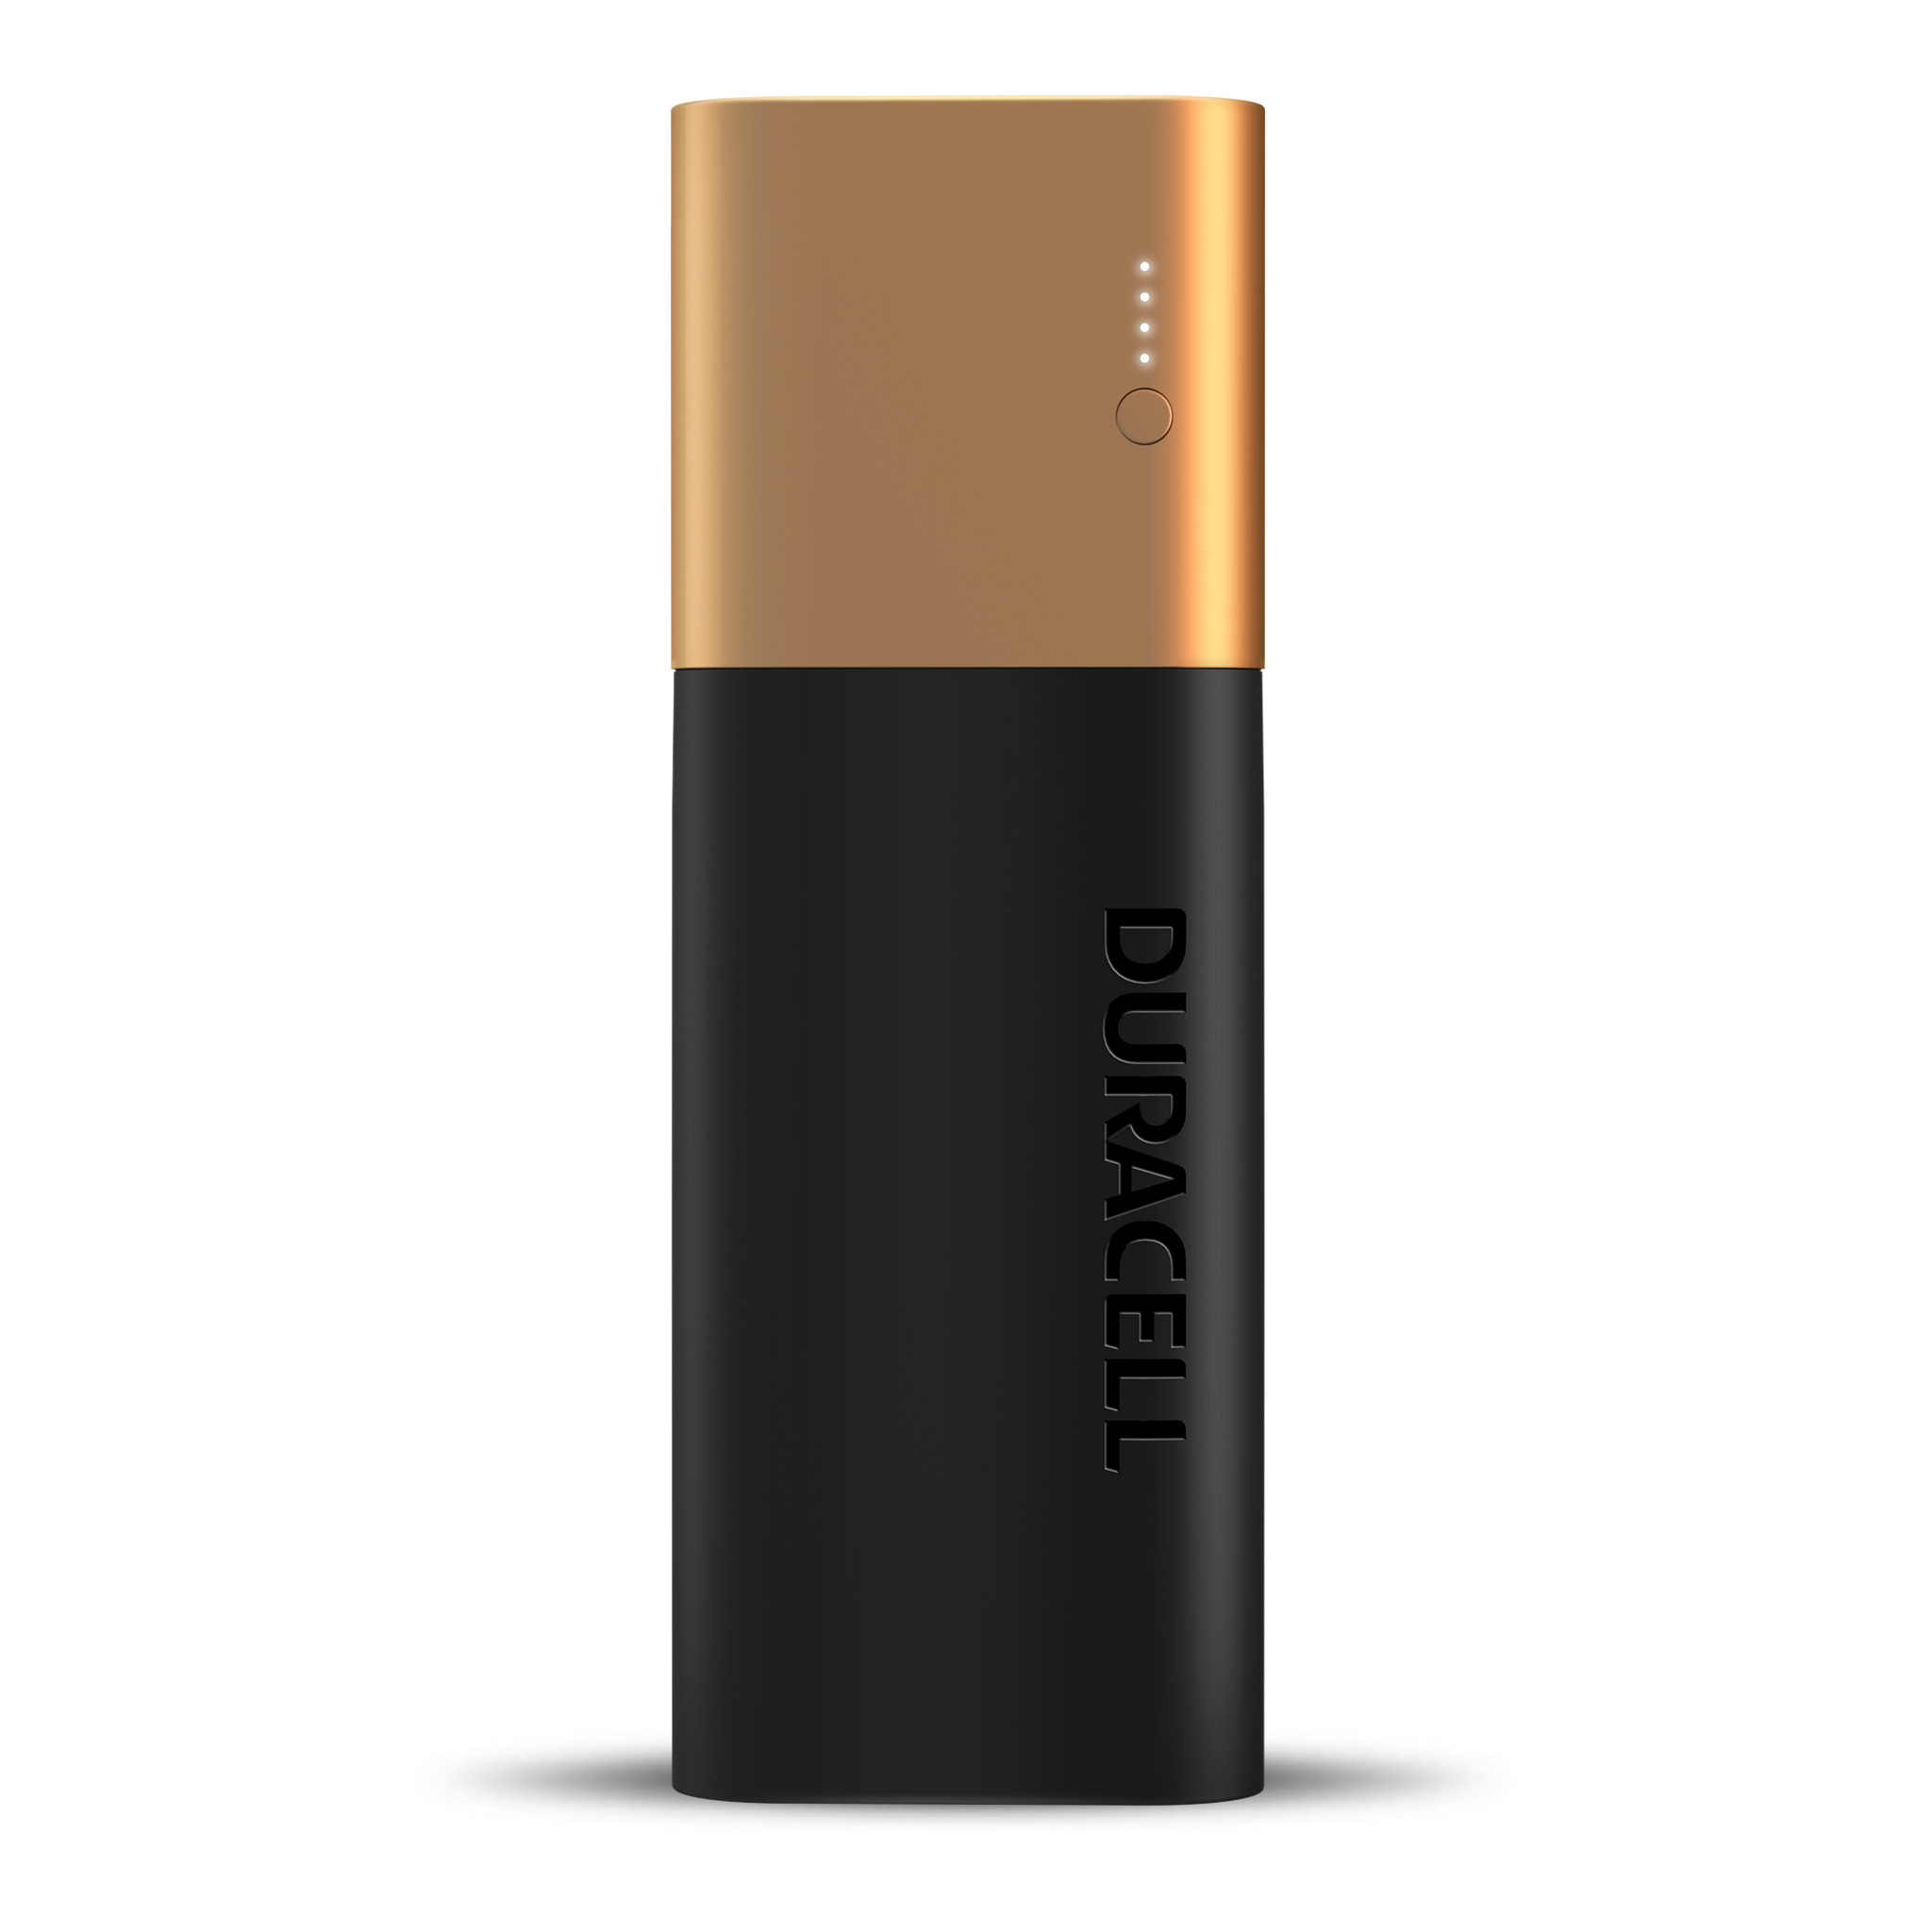 2 Day Portable Charger Duracell Powerbank Duracell Batteries a Rechargeable Coin Button